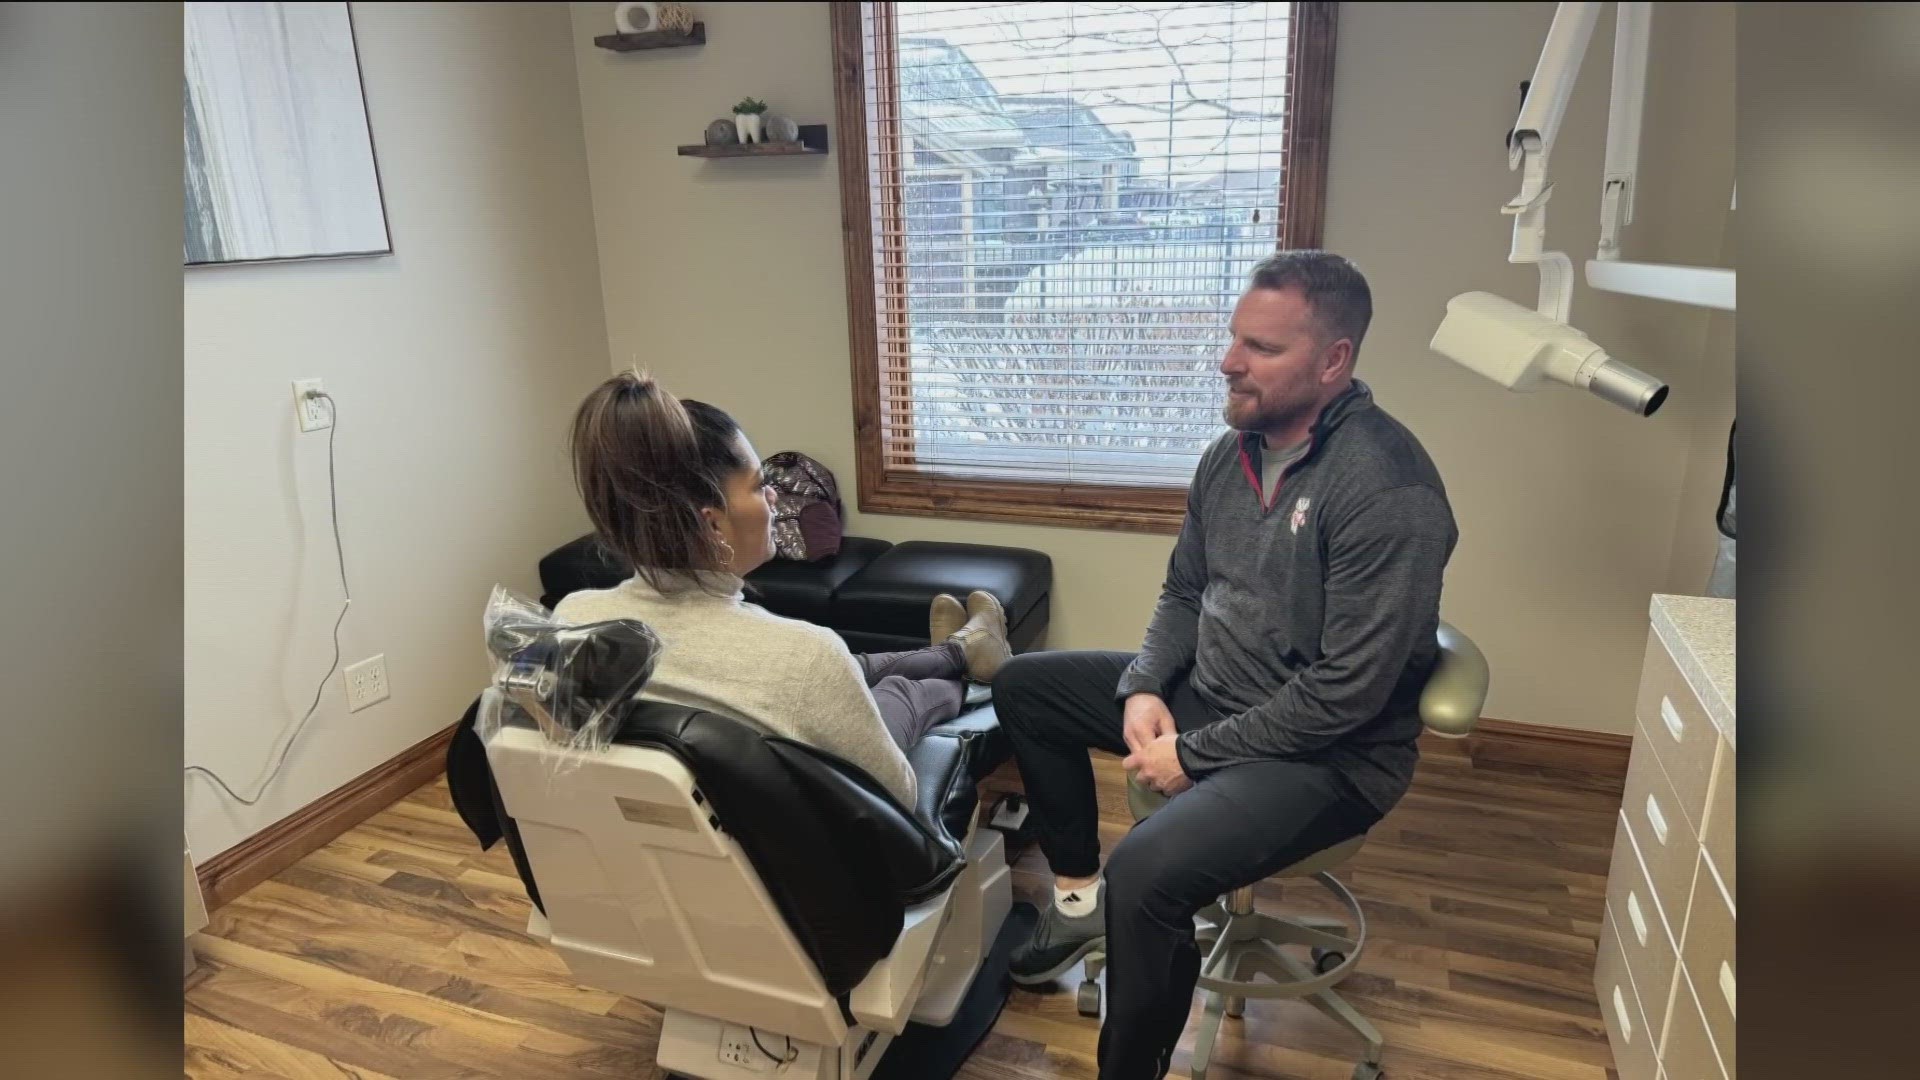 The Community Council of Idaho opened a dental clinic and said it's to help those with low income and from farmworker backgrounds.